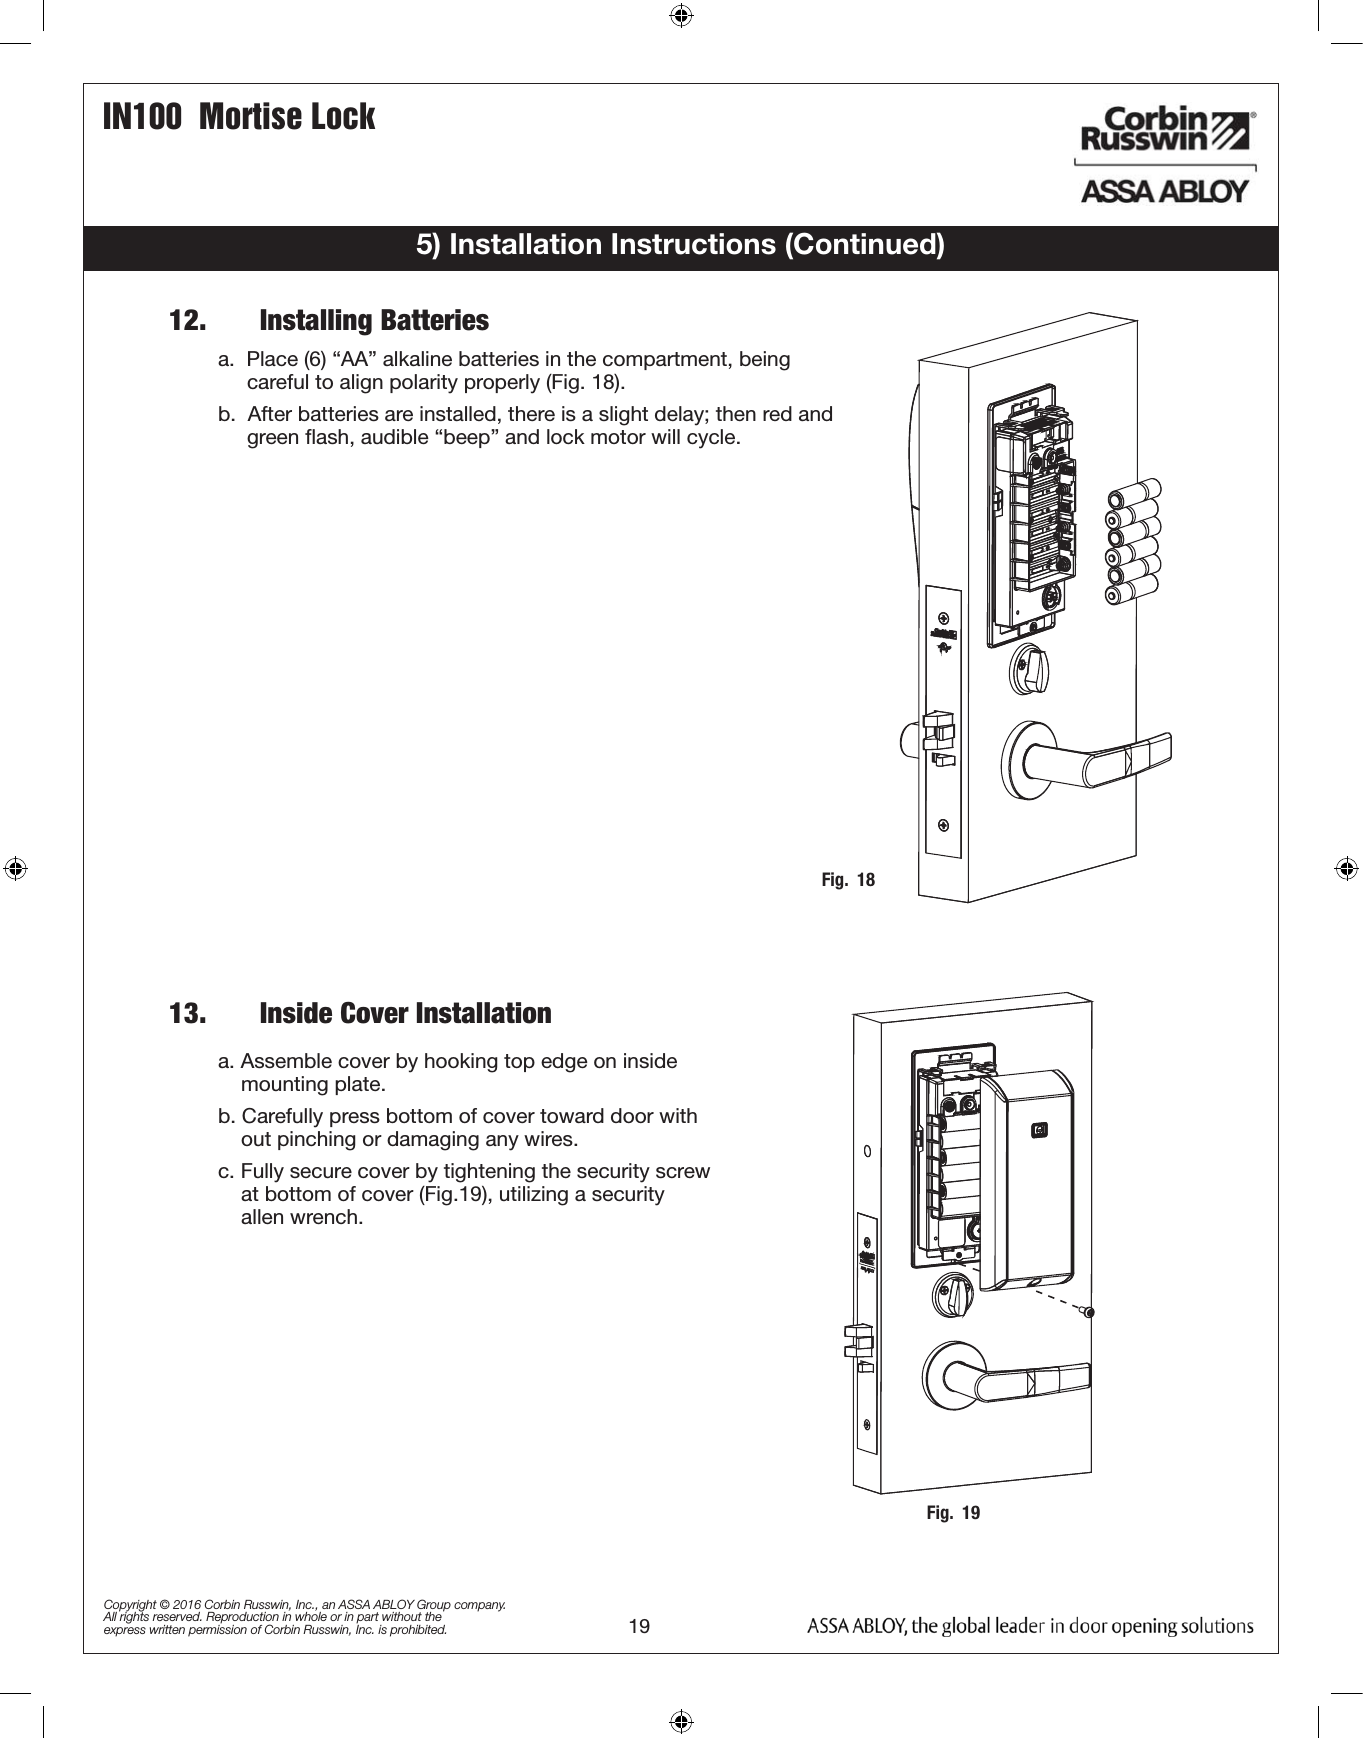 IN100  Mortise Lock19Copyright © 2016 Corbin Russwin, Inc., an ASSA ABLOY Group company. All rights reserved. Reproduction in whole or in part without the express written permission of Corbin Russwin, Inc. is prohibited.Fig.  195) Installation Instructions (Continued)a. Assemble cover by hooking top edge on inside          mounting plate.b. Carefully press bottom of cover toward door with      out pinching or damaging any wires.c. Fully secure cover by tightening the security screw      at bottom of cover (Fig.19), utilizing a security           allen wrench.12.       Installing Batteries13.       Inside Cover InstallationFig.  18a.  Place (6) “AA” alkaline batteries in the compartment, being            careful to align polarity properly (Fig. 18).b.  After batteries are installed, there is a slight delay; then red and       green ﬂash, audible “beep” and lock motor will cycle. 